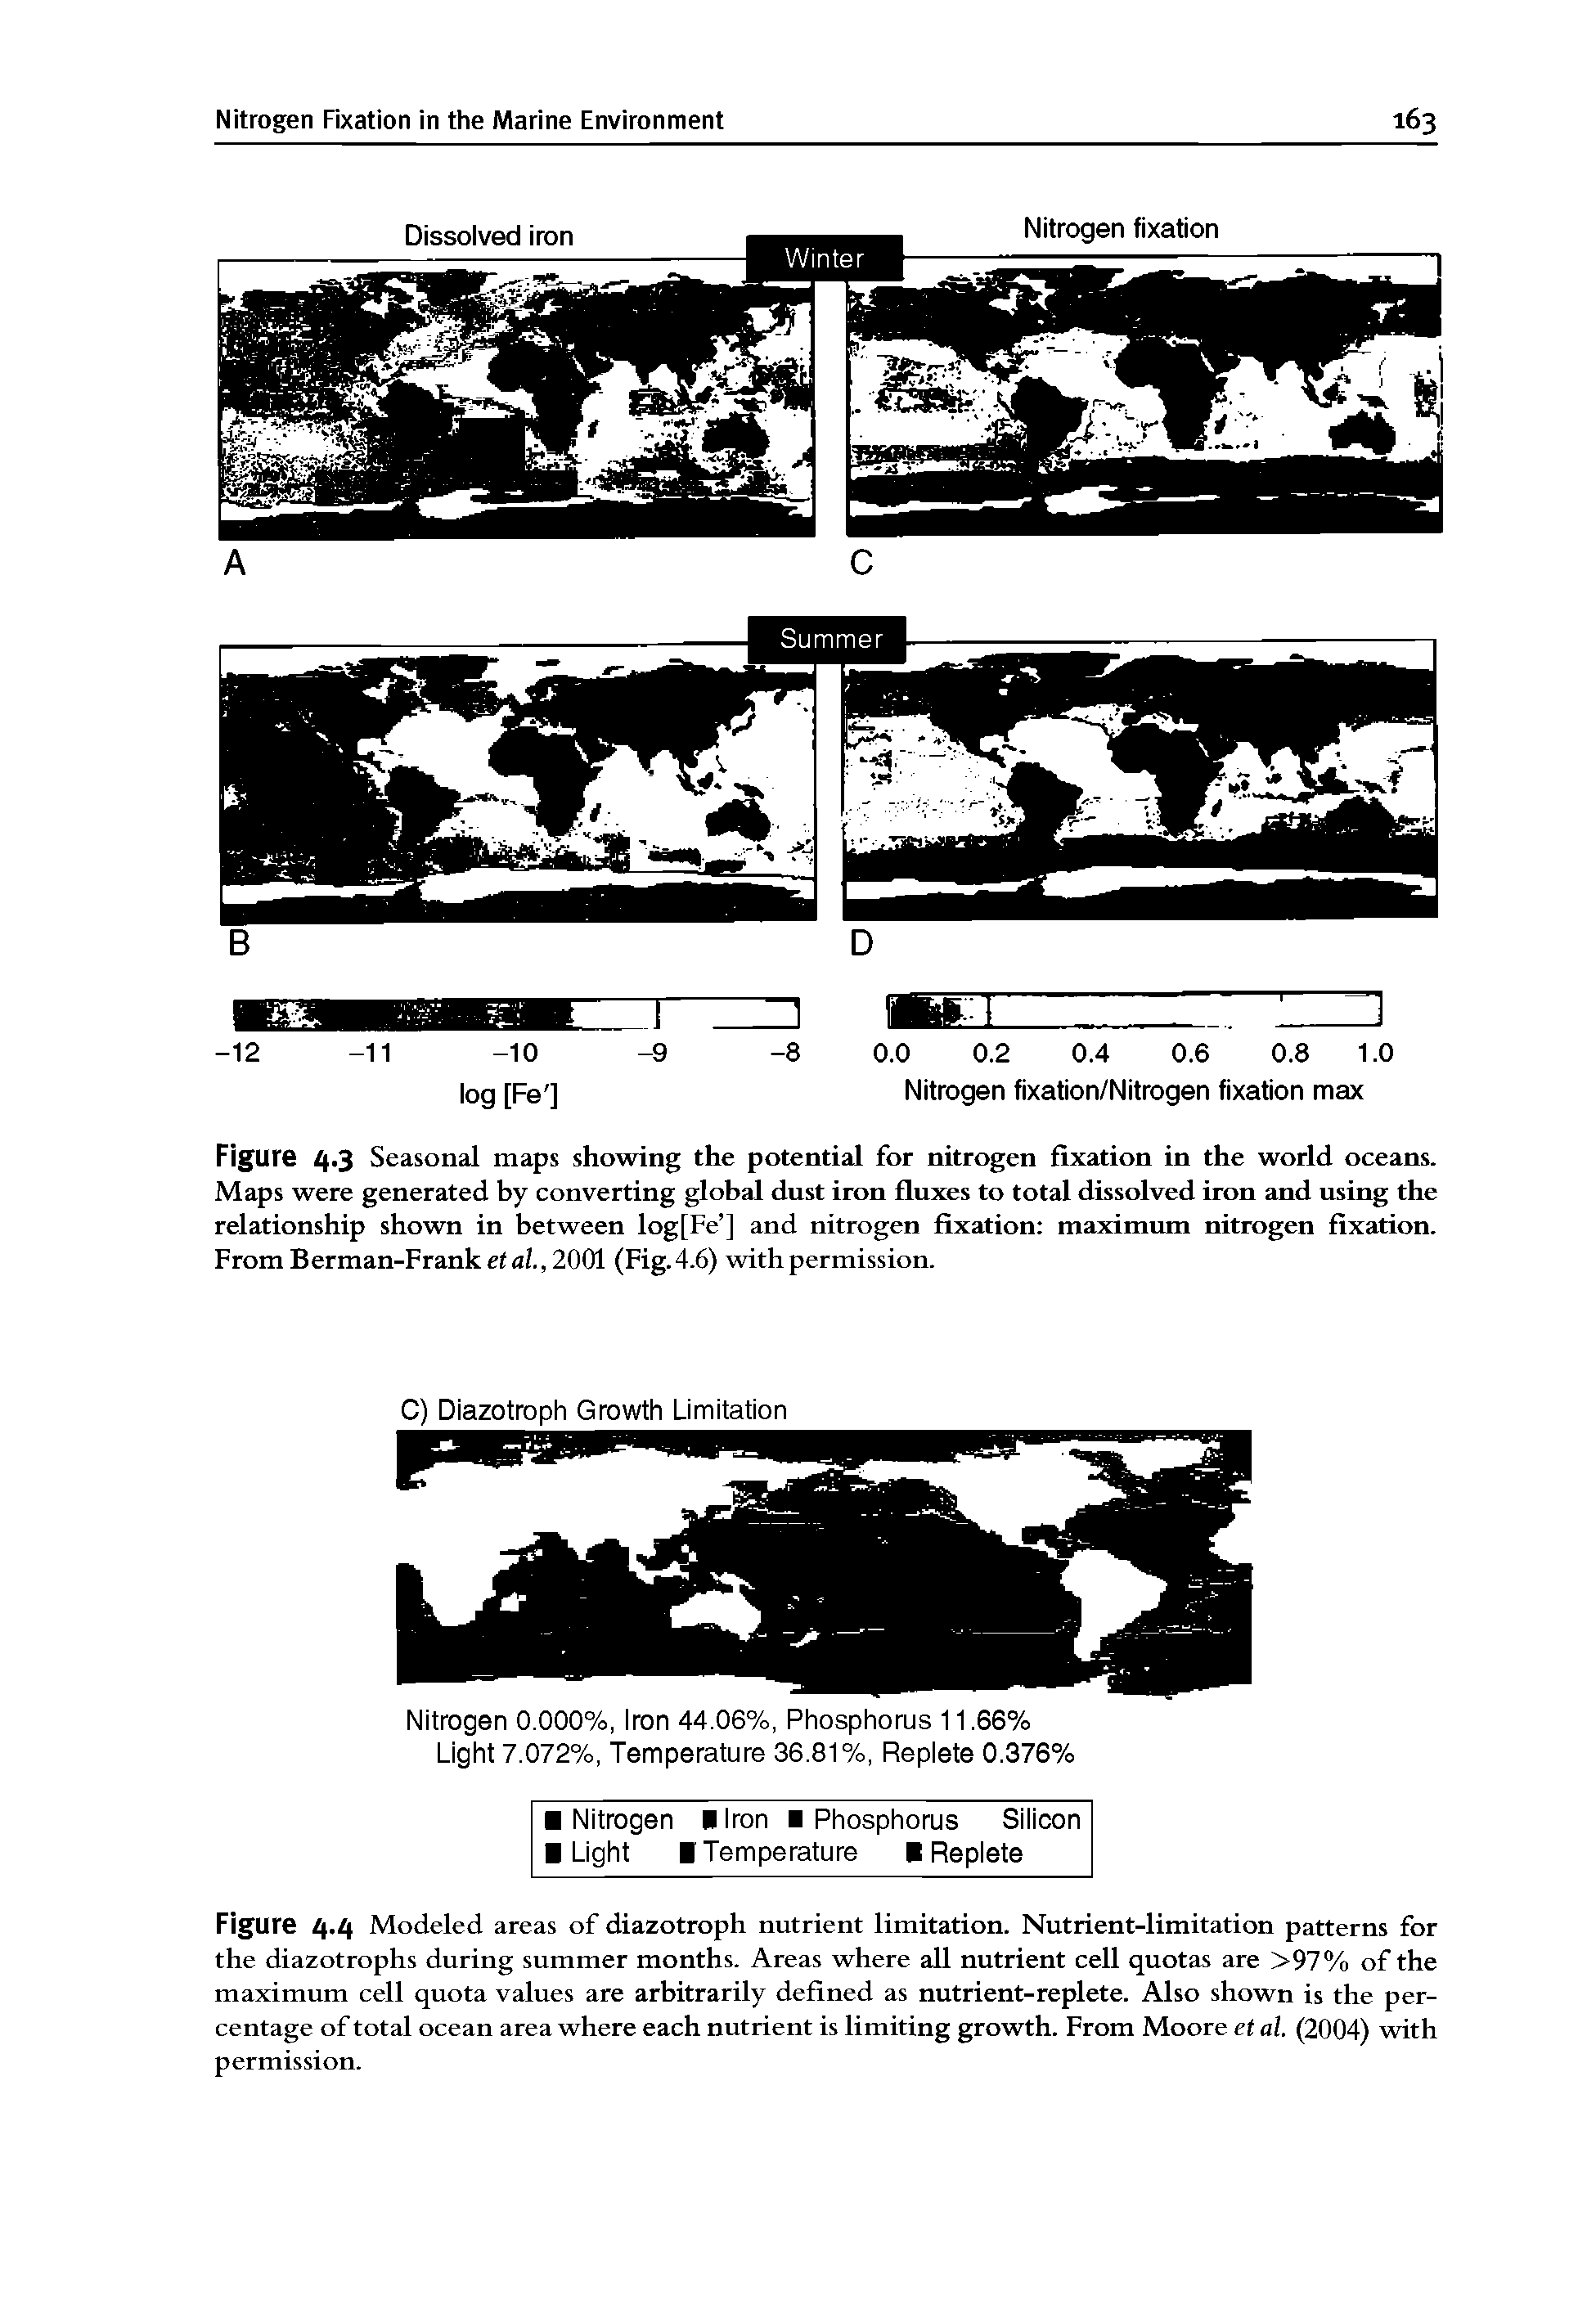 Figure Z(.3 Seasonal maps showing the potential for nitrogen fixation in the world oceans. Maps were generated by converting global dust iron fluxes to total dissolved iron and using the relationship shown in between log[Fe ] and nitrogen fixation maximum nitrogen fixation. From Berman-Frank ctaf., 2001 (Fig.4.6) with permission.